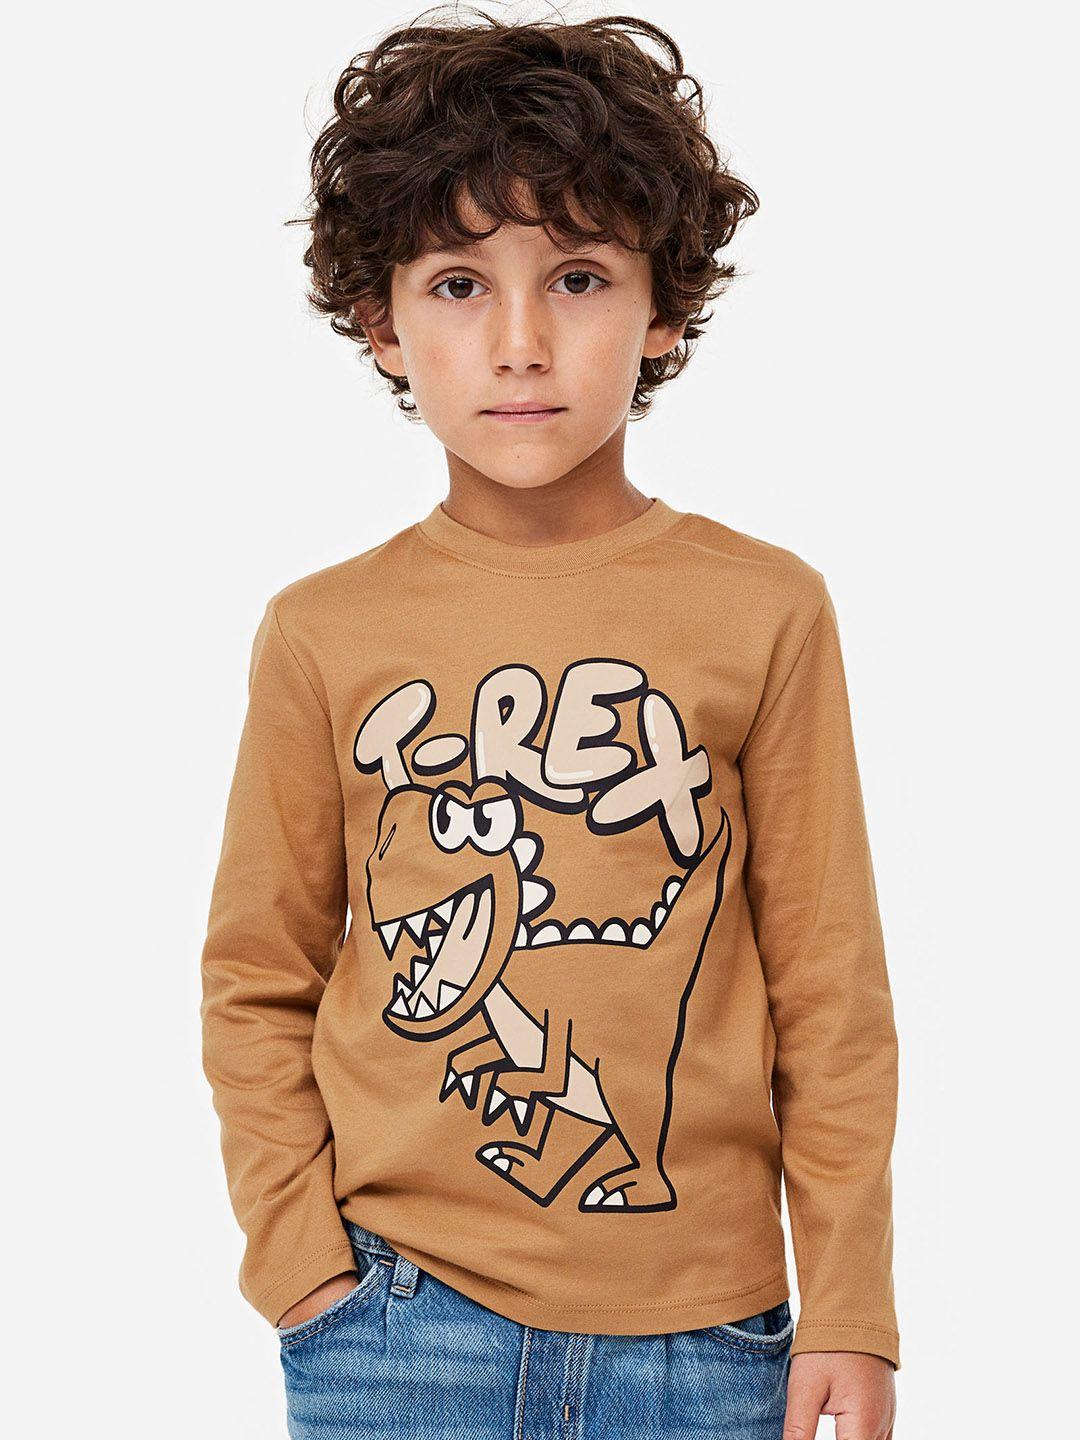 h&m-boys-graphic-printed-jersey-t-shirts